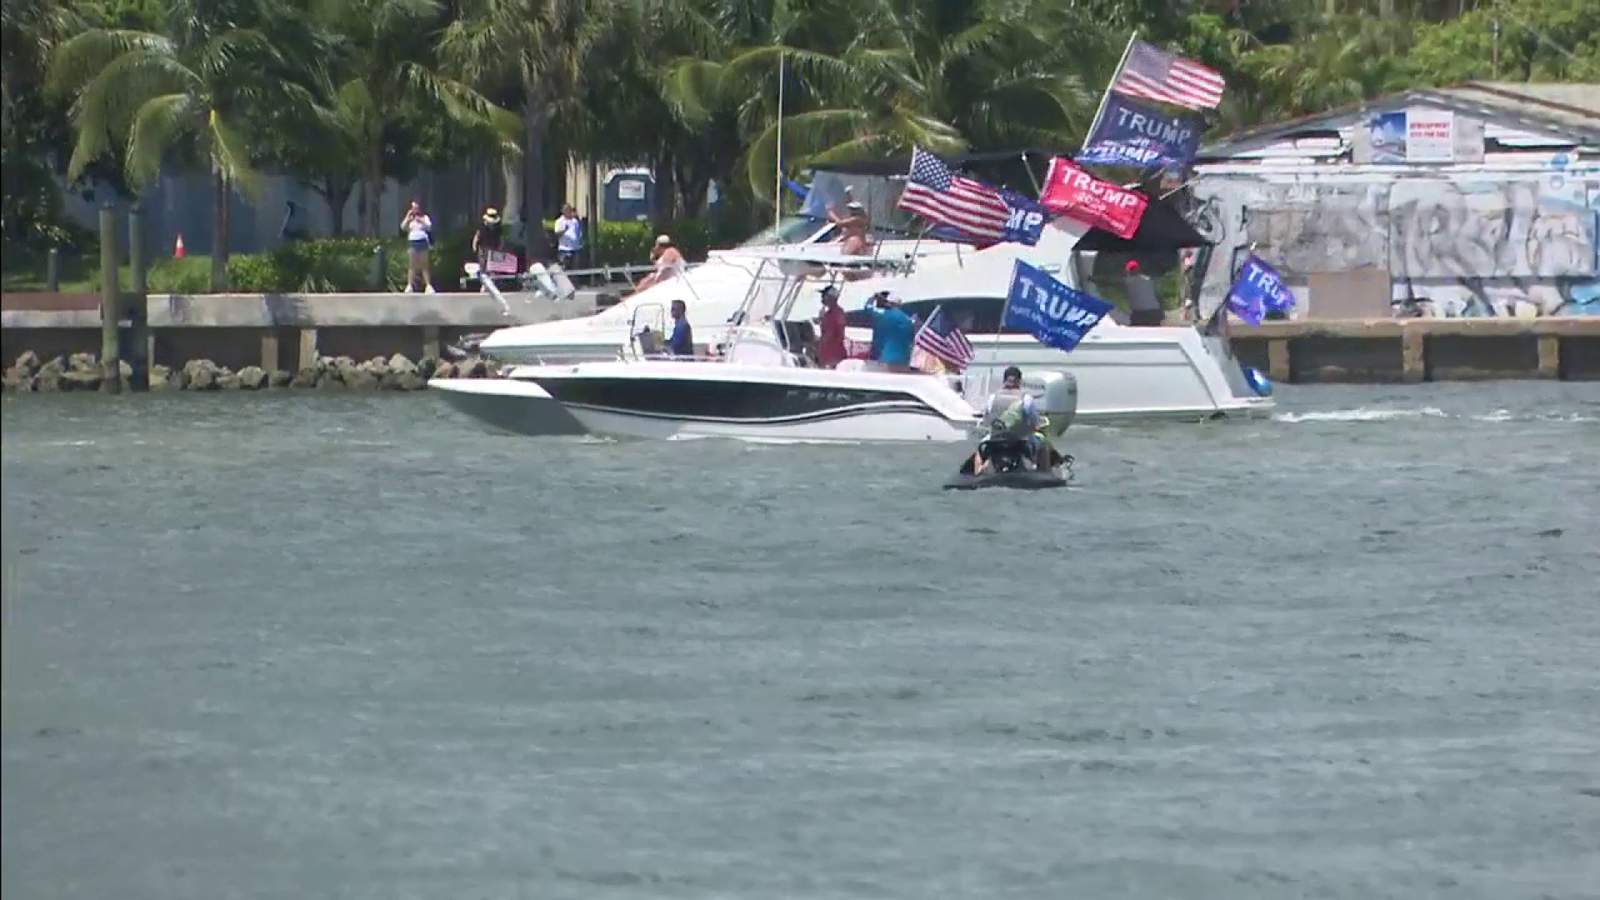 Trump supporters take to the waters for boat rally